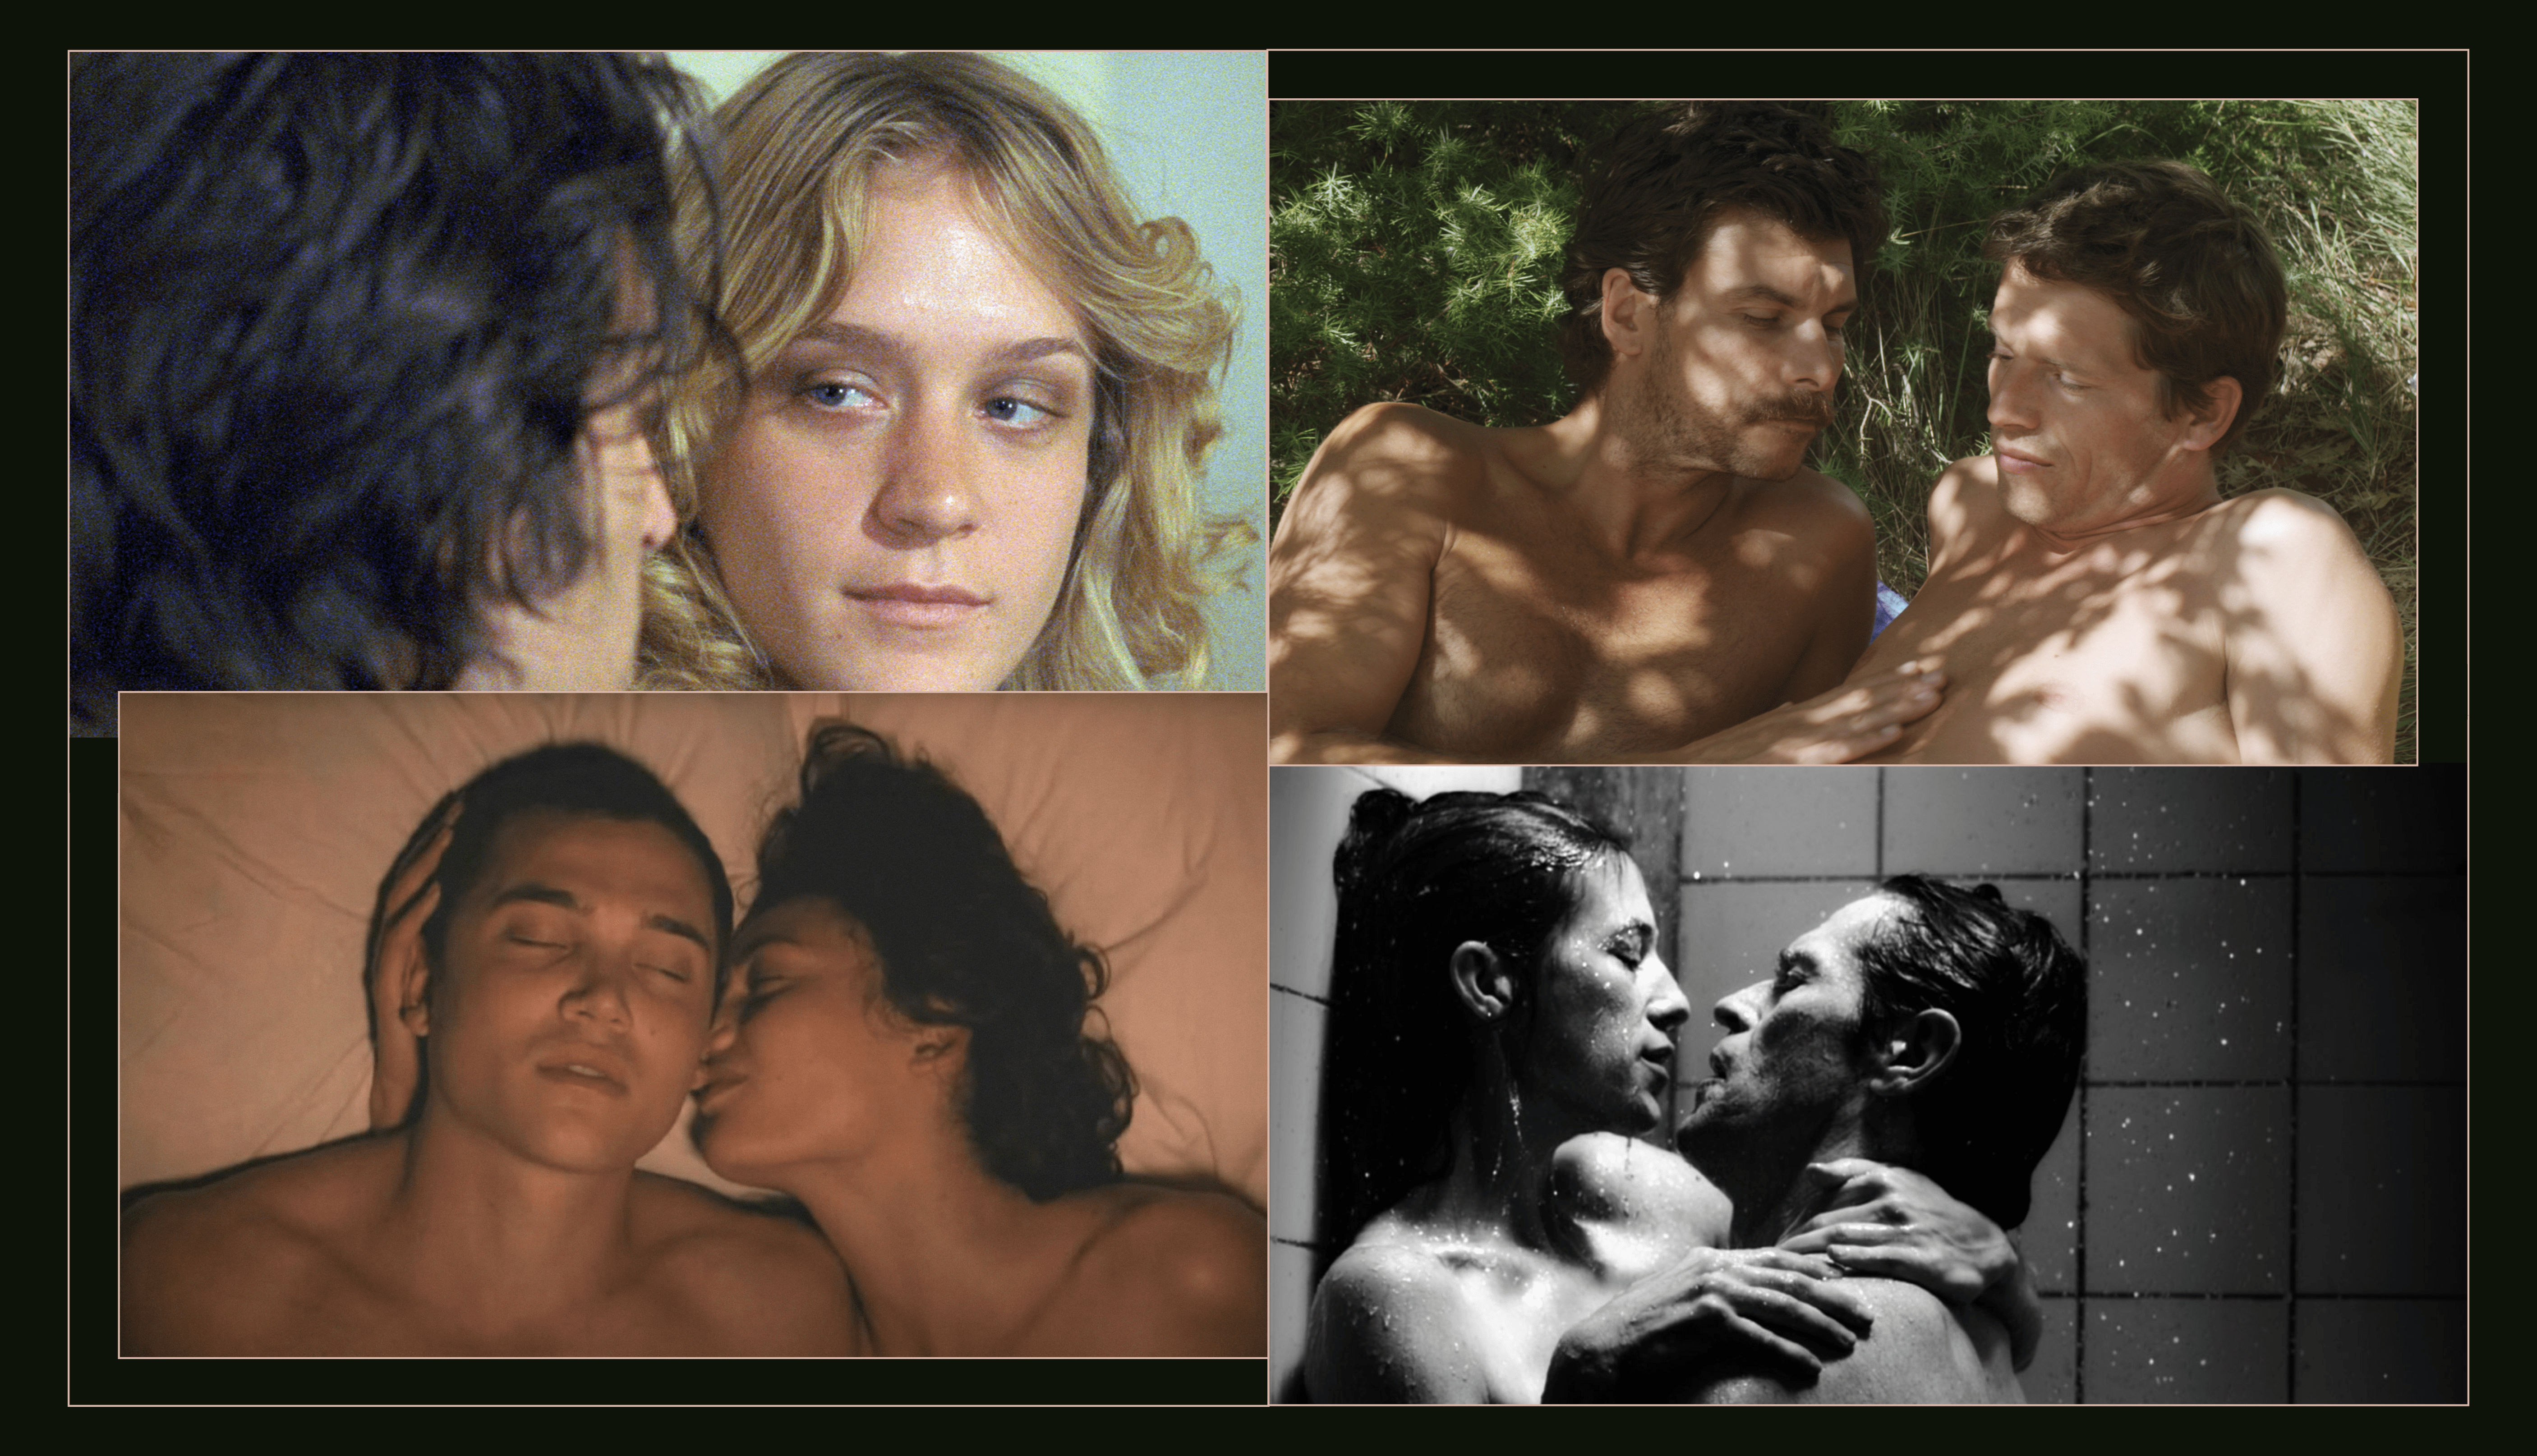 barry washburn recommends foreign film sex scene pic